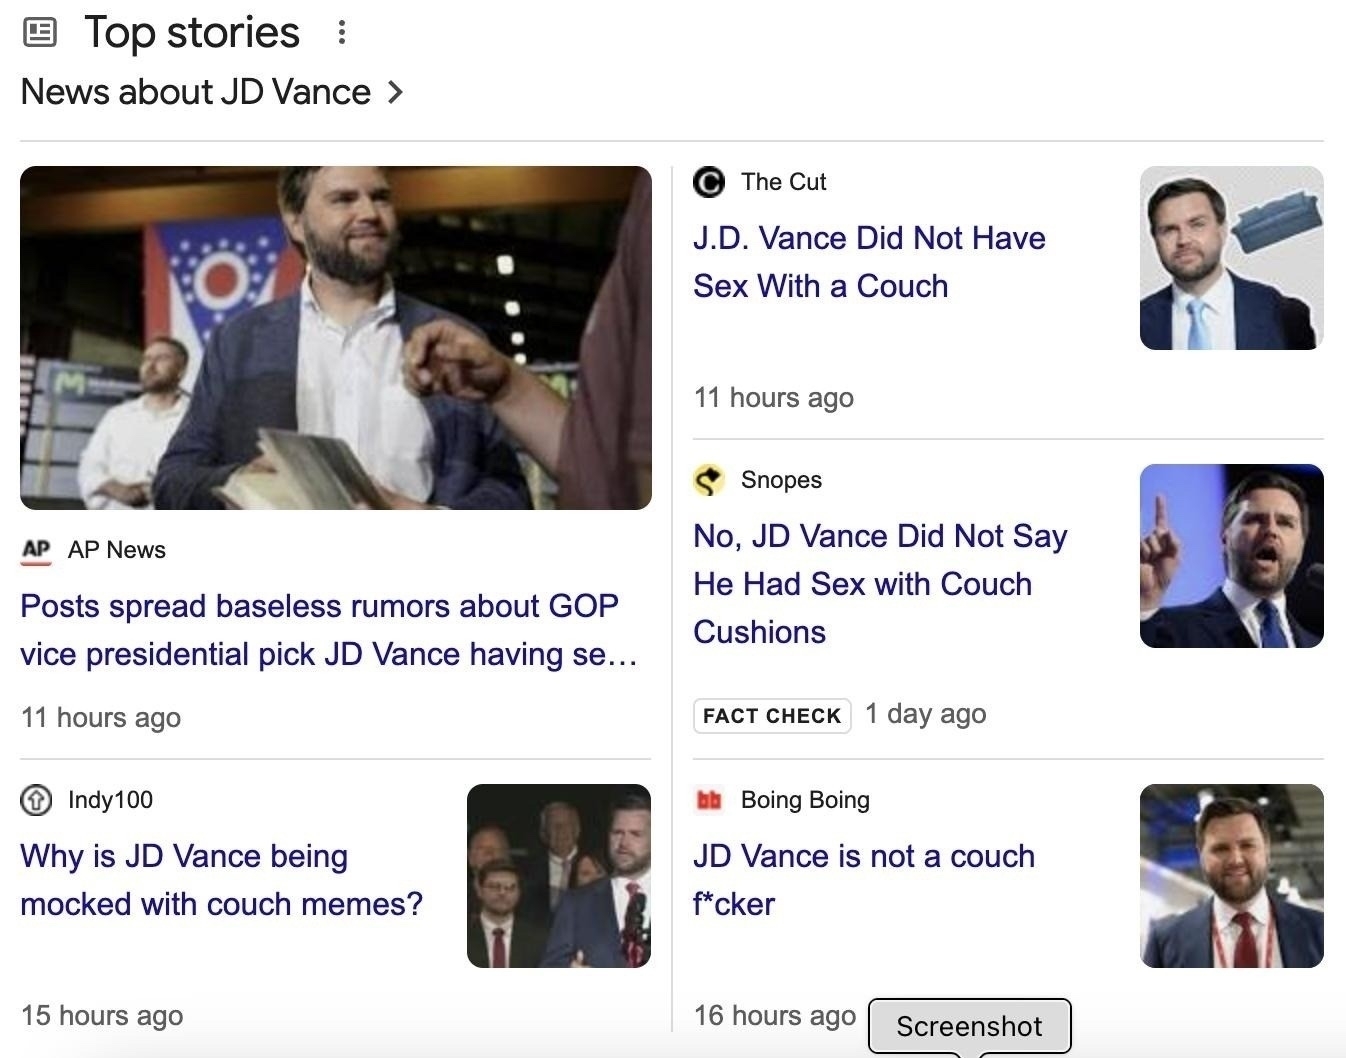 The image shows a collection of news articles and headlines about JD Vance, focusing on various claims and memes related to him and a couch.